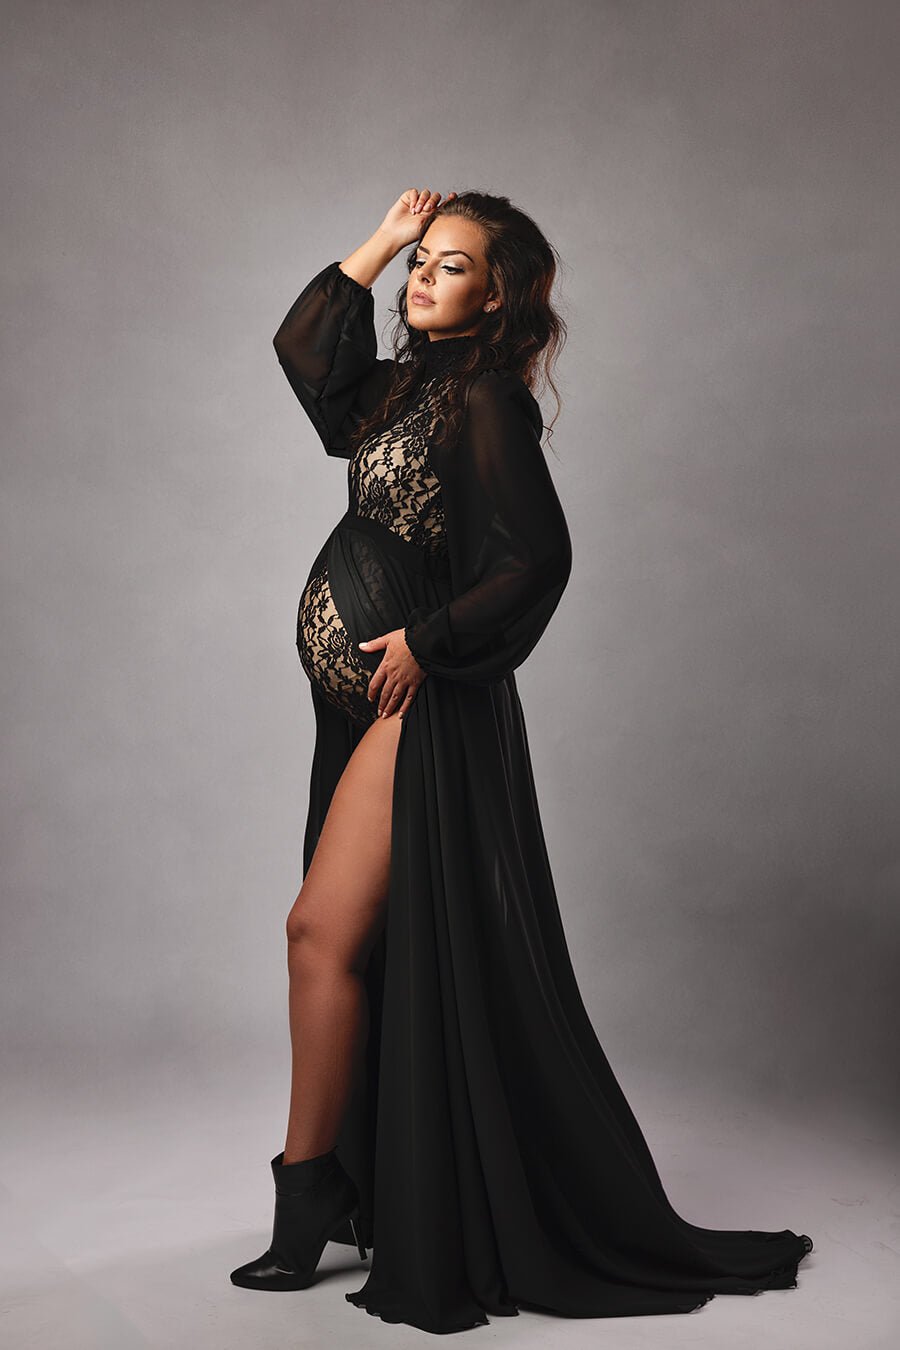 brunette pregnant model poses in a studio wearing a black lace bodysuit with chiffon sleeves and a long chiffon skirt with a split